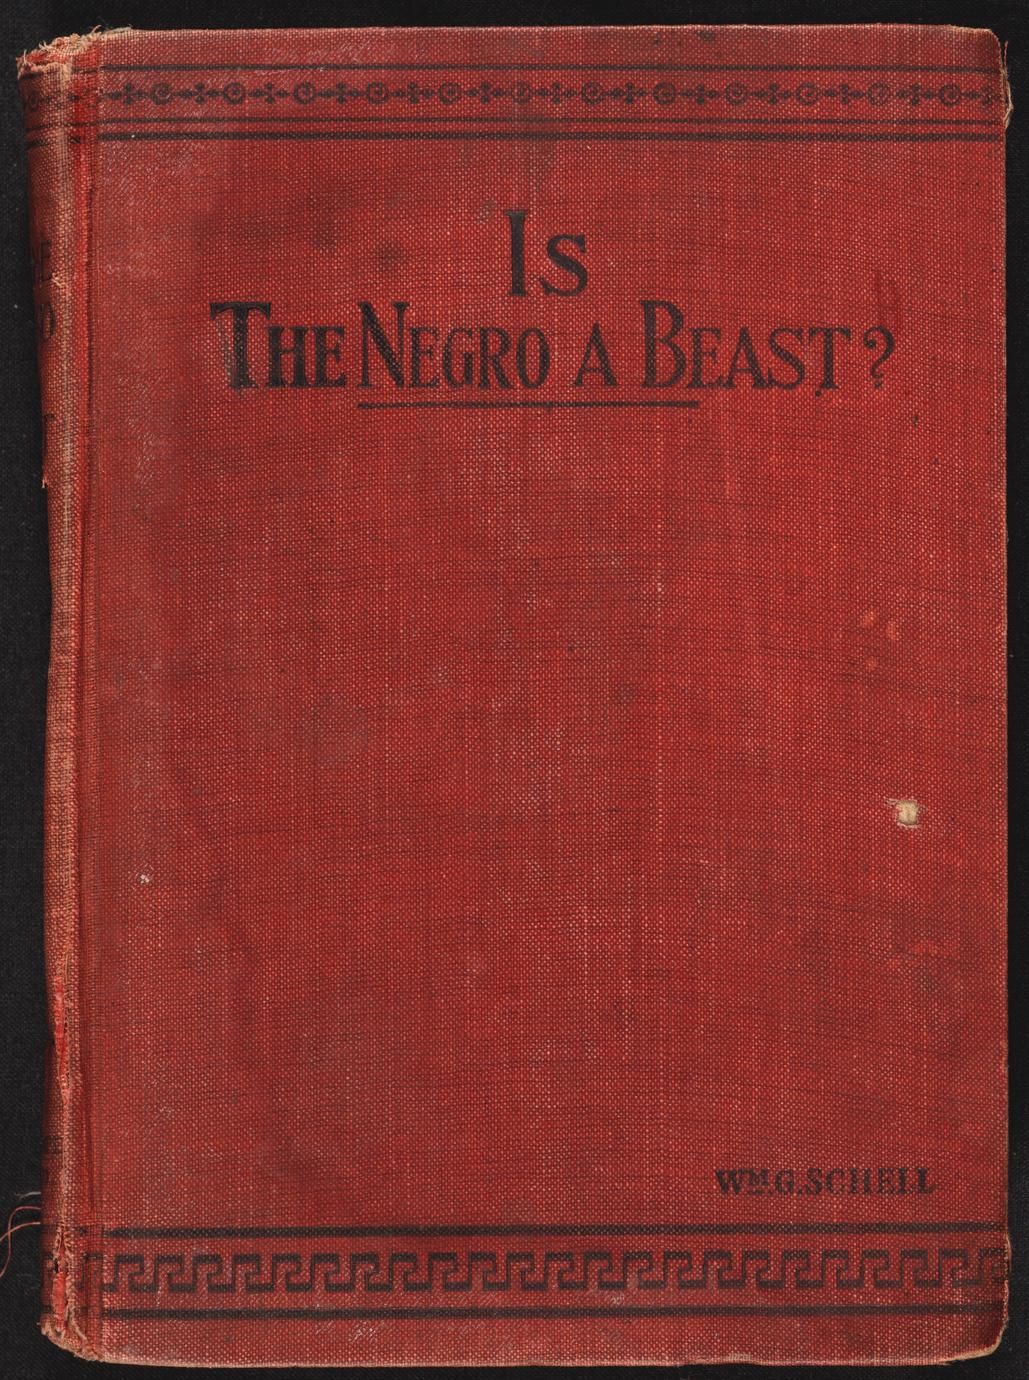 Is the negro a beast? : a reply to Chas. Carroll's book entitled The negro a beast : proving that the negro is human from Biblical, scientific, and historical standpoints (1 of 2)